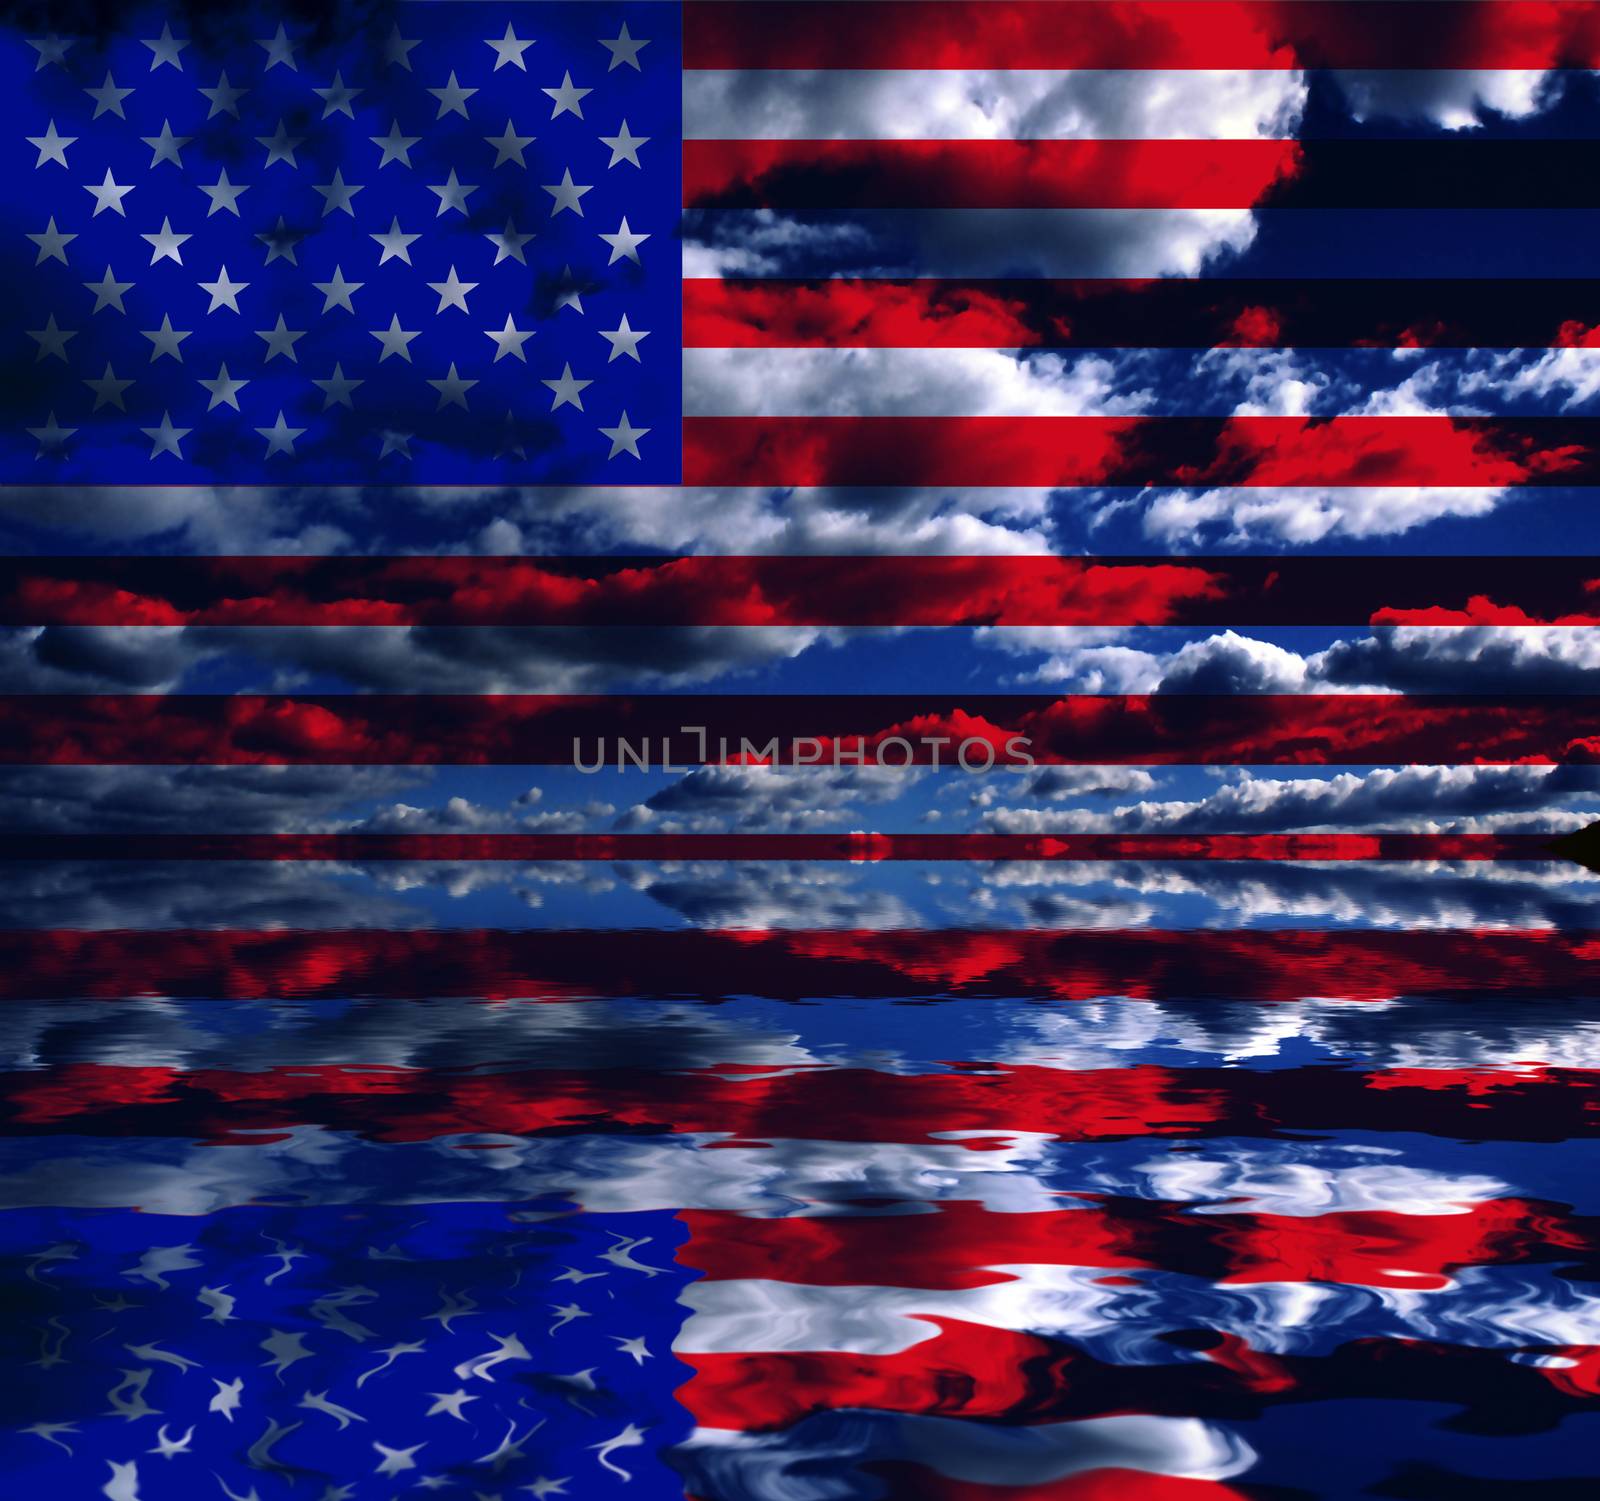 Surreal digital art. USA Flag over clouds reflected in the water.